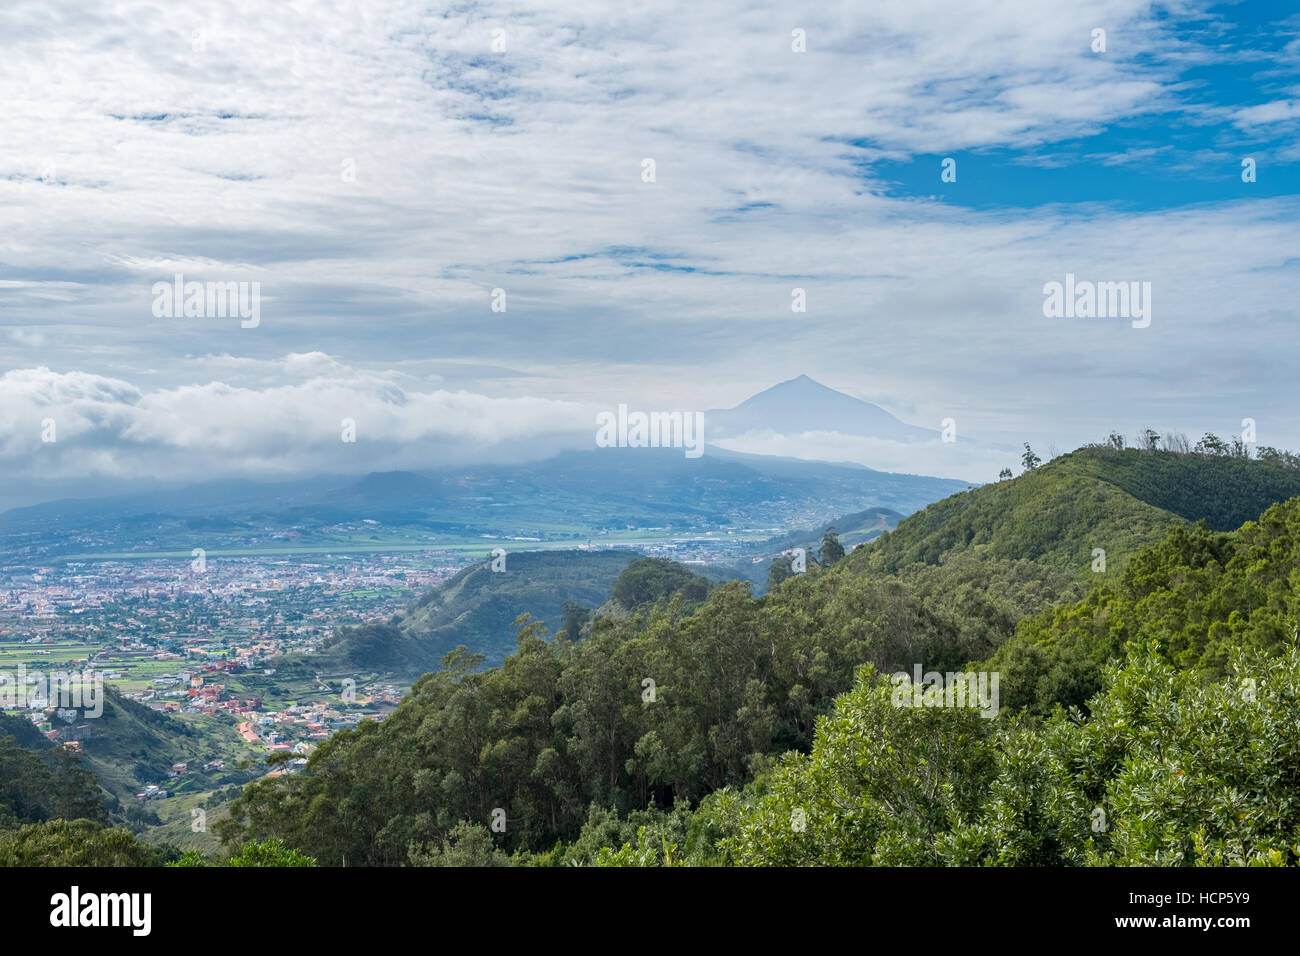 View from mountain - forest landscape and village in valley Stock Photo